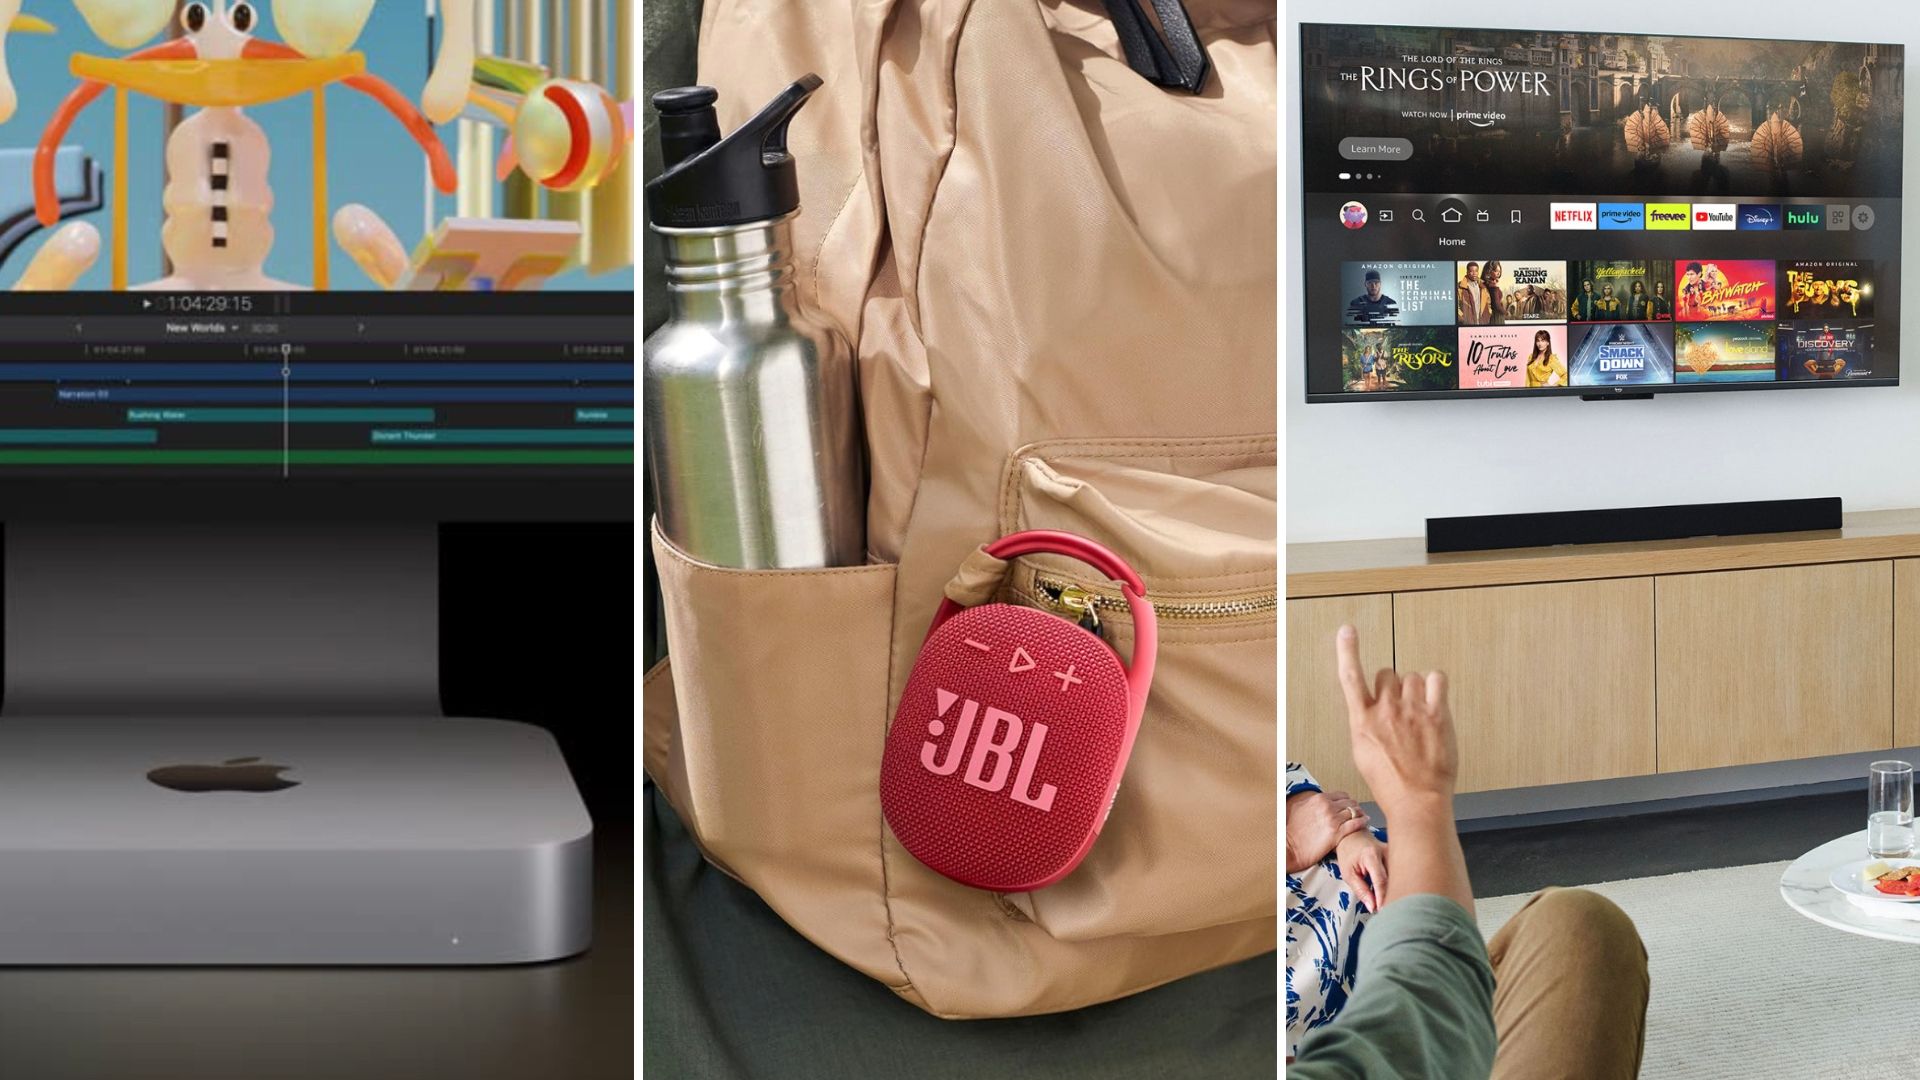 HTG deals featuring Apple, JBL, and Amazon